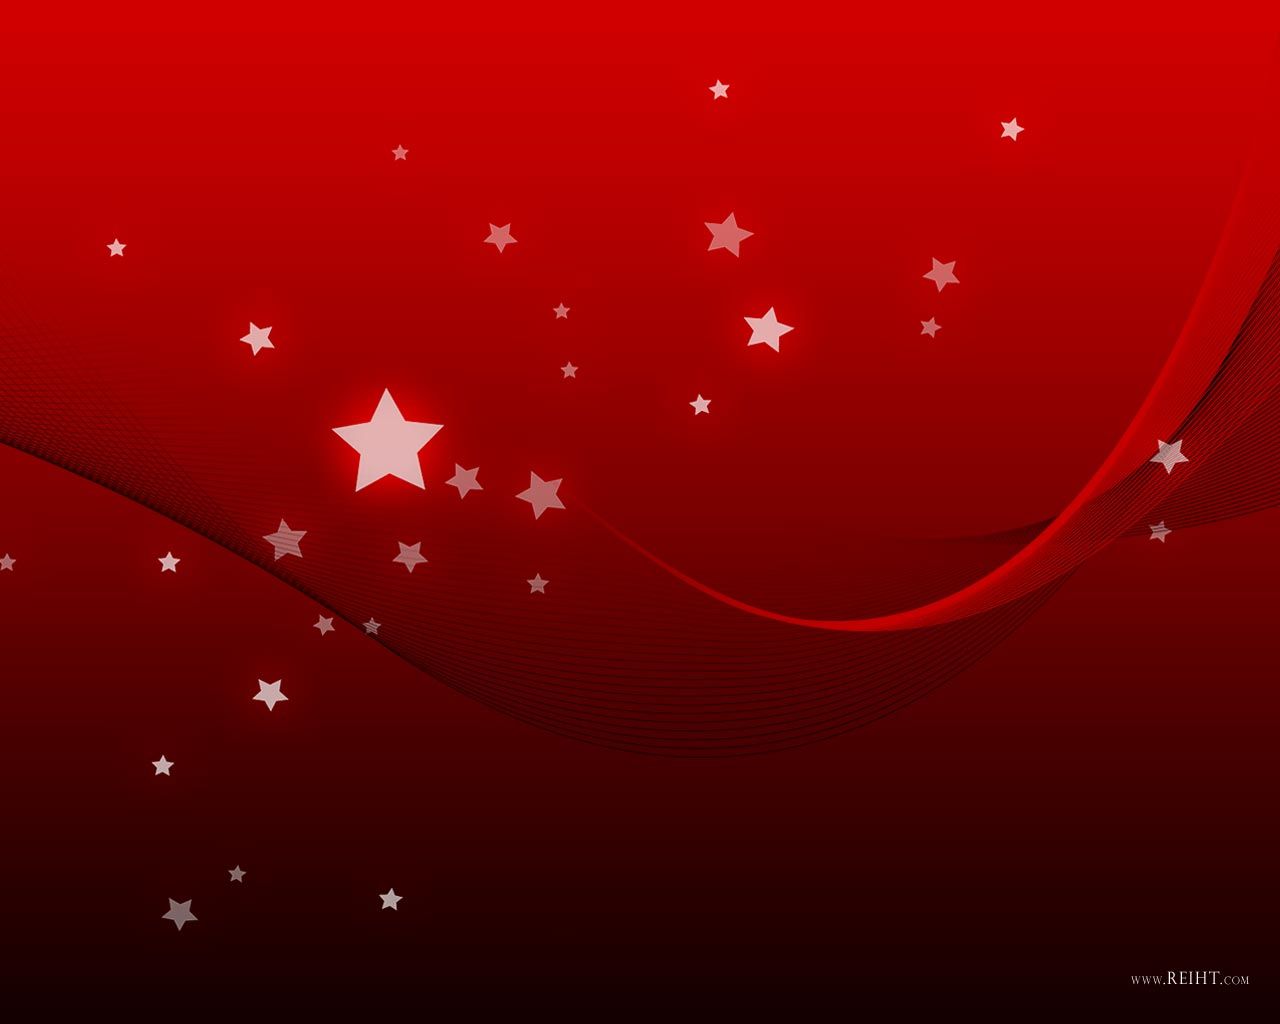 Free download red 3D HD background Red 3D wallpaper [1280x1024] for your Desktop, Mobile & Tablet. Explore Red Wallpaper Image. Red Desktop Wallpaper, Red Background Wallpaper, Red HD Wallpaper